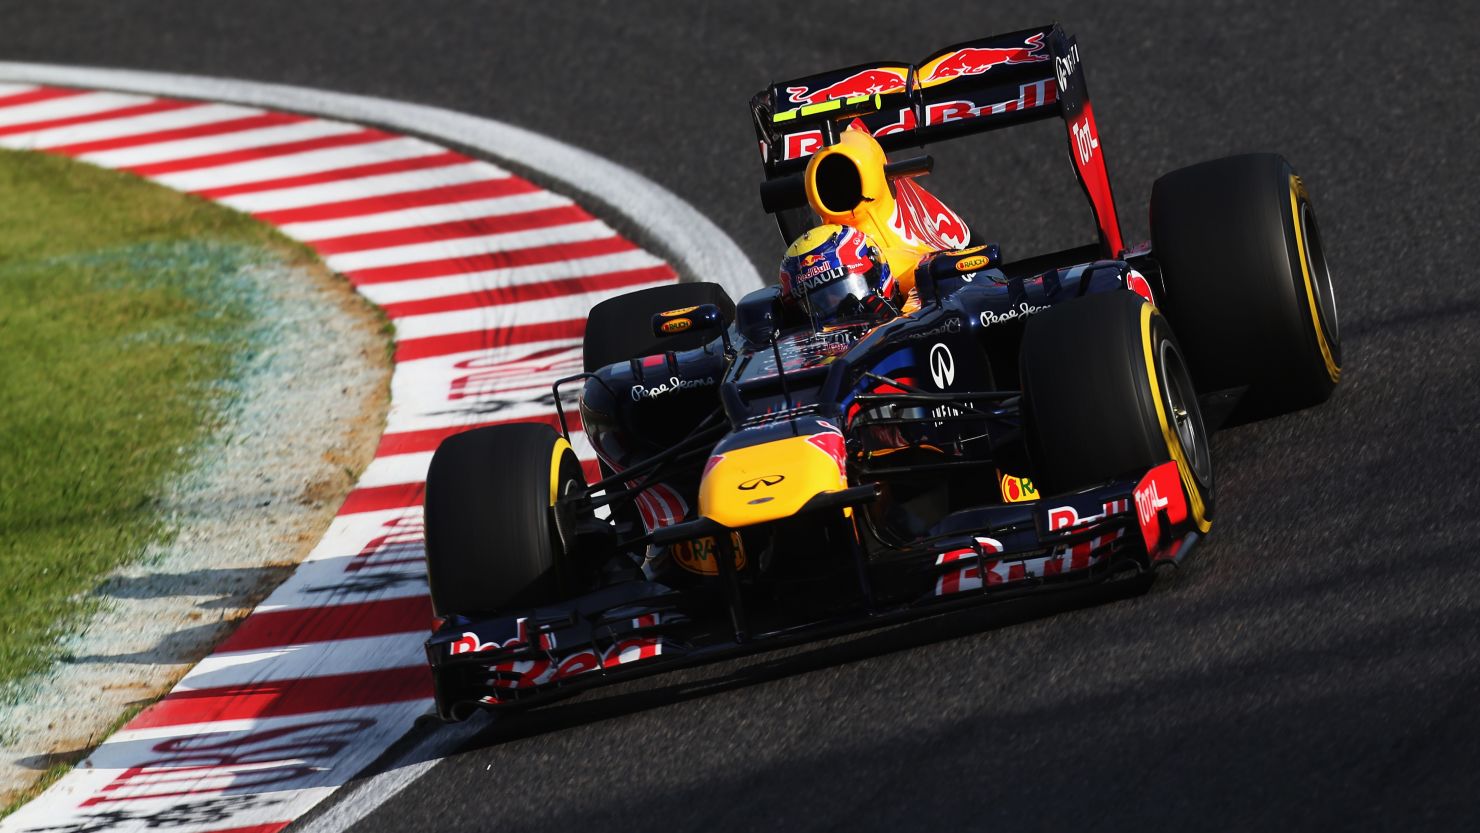 Red Bull's Australian driver Mark Webber is currently fifth in the 2012 F1 world championship.